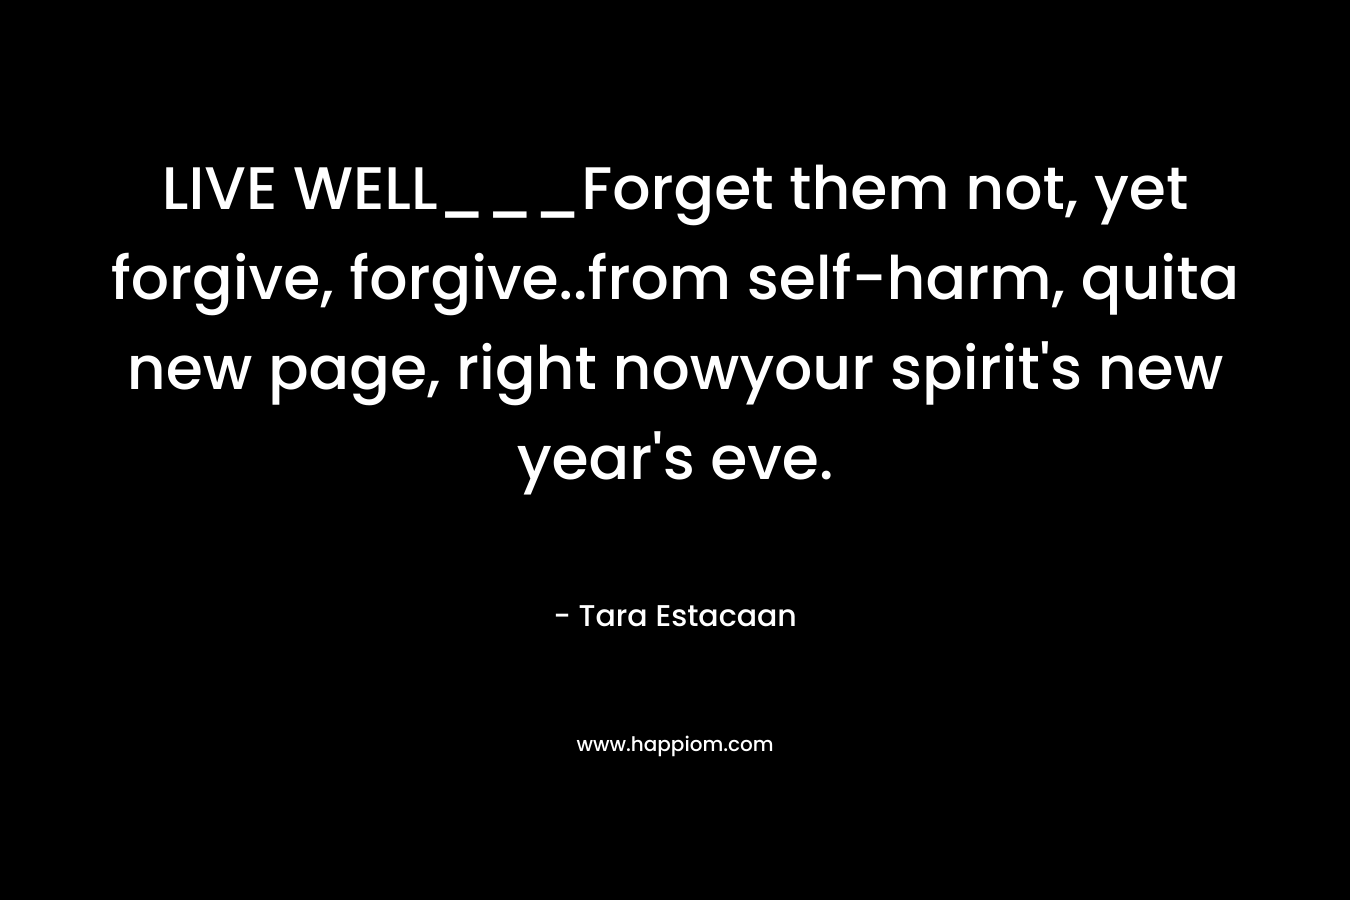 LIVE WELL___Forget them not, yet forgive, forgive..from self-harm, quita new page, right nowyour spirit’s new year’s eve. – Tara Estacaan